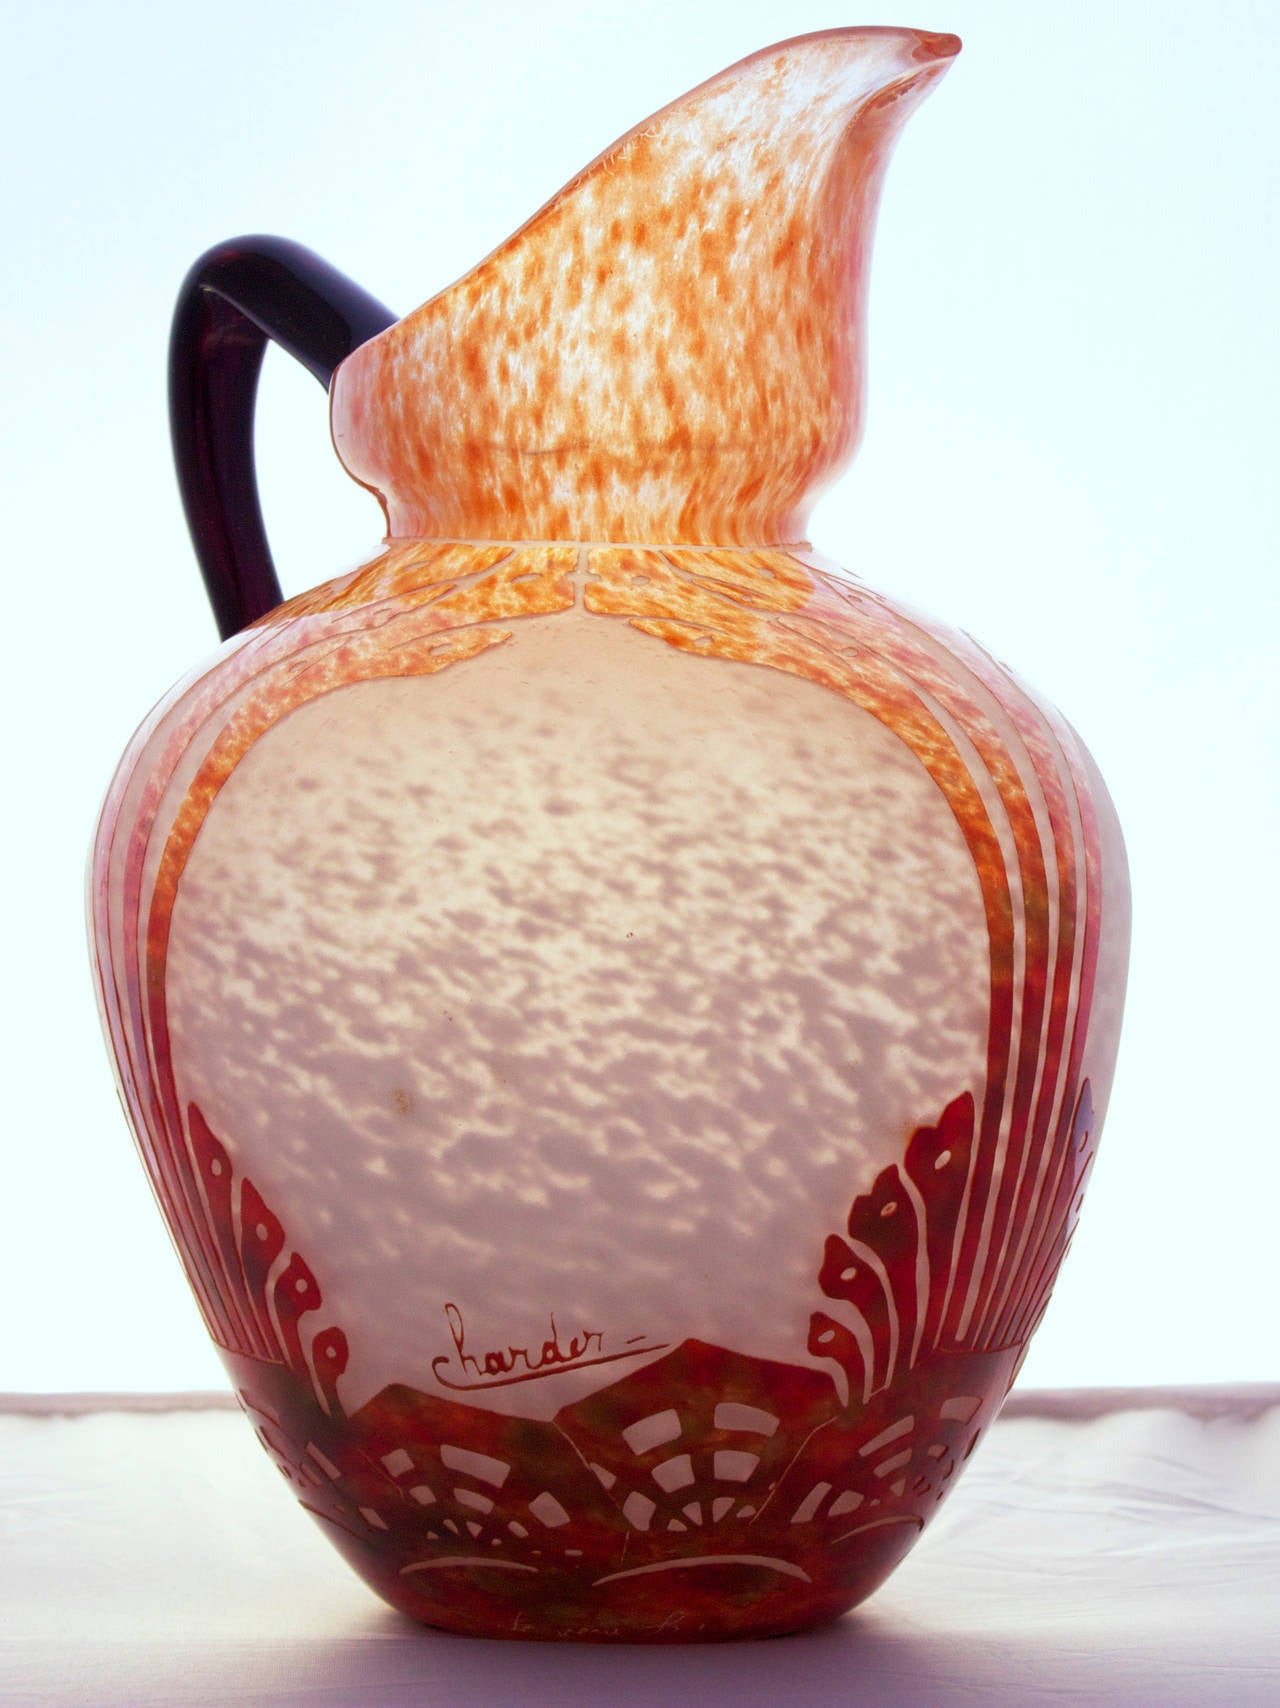 Etched Art Deco Cameo Glass Pitcher by Charles Schneider